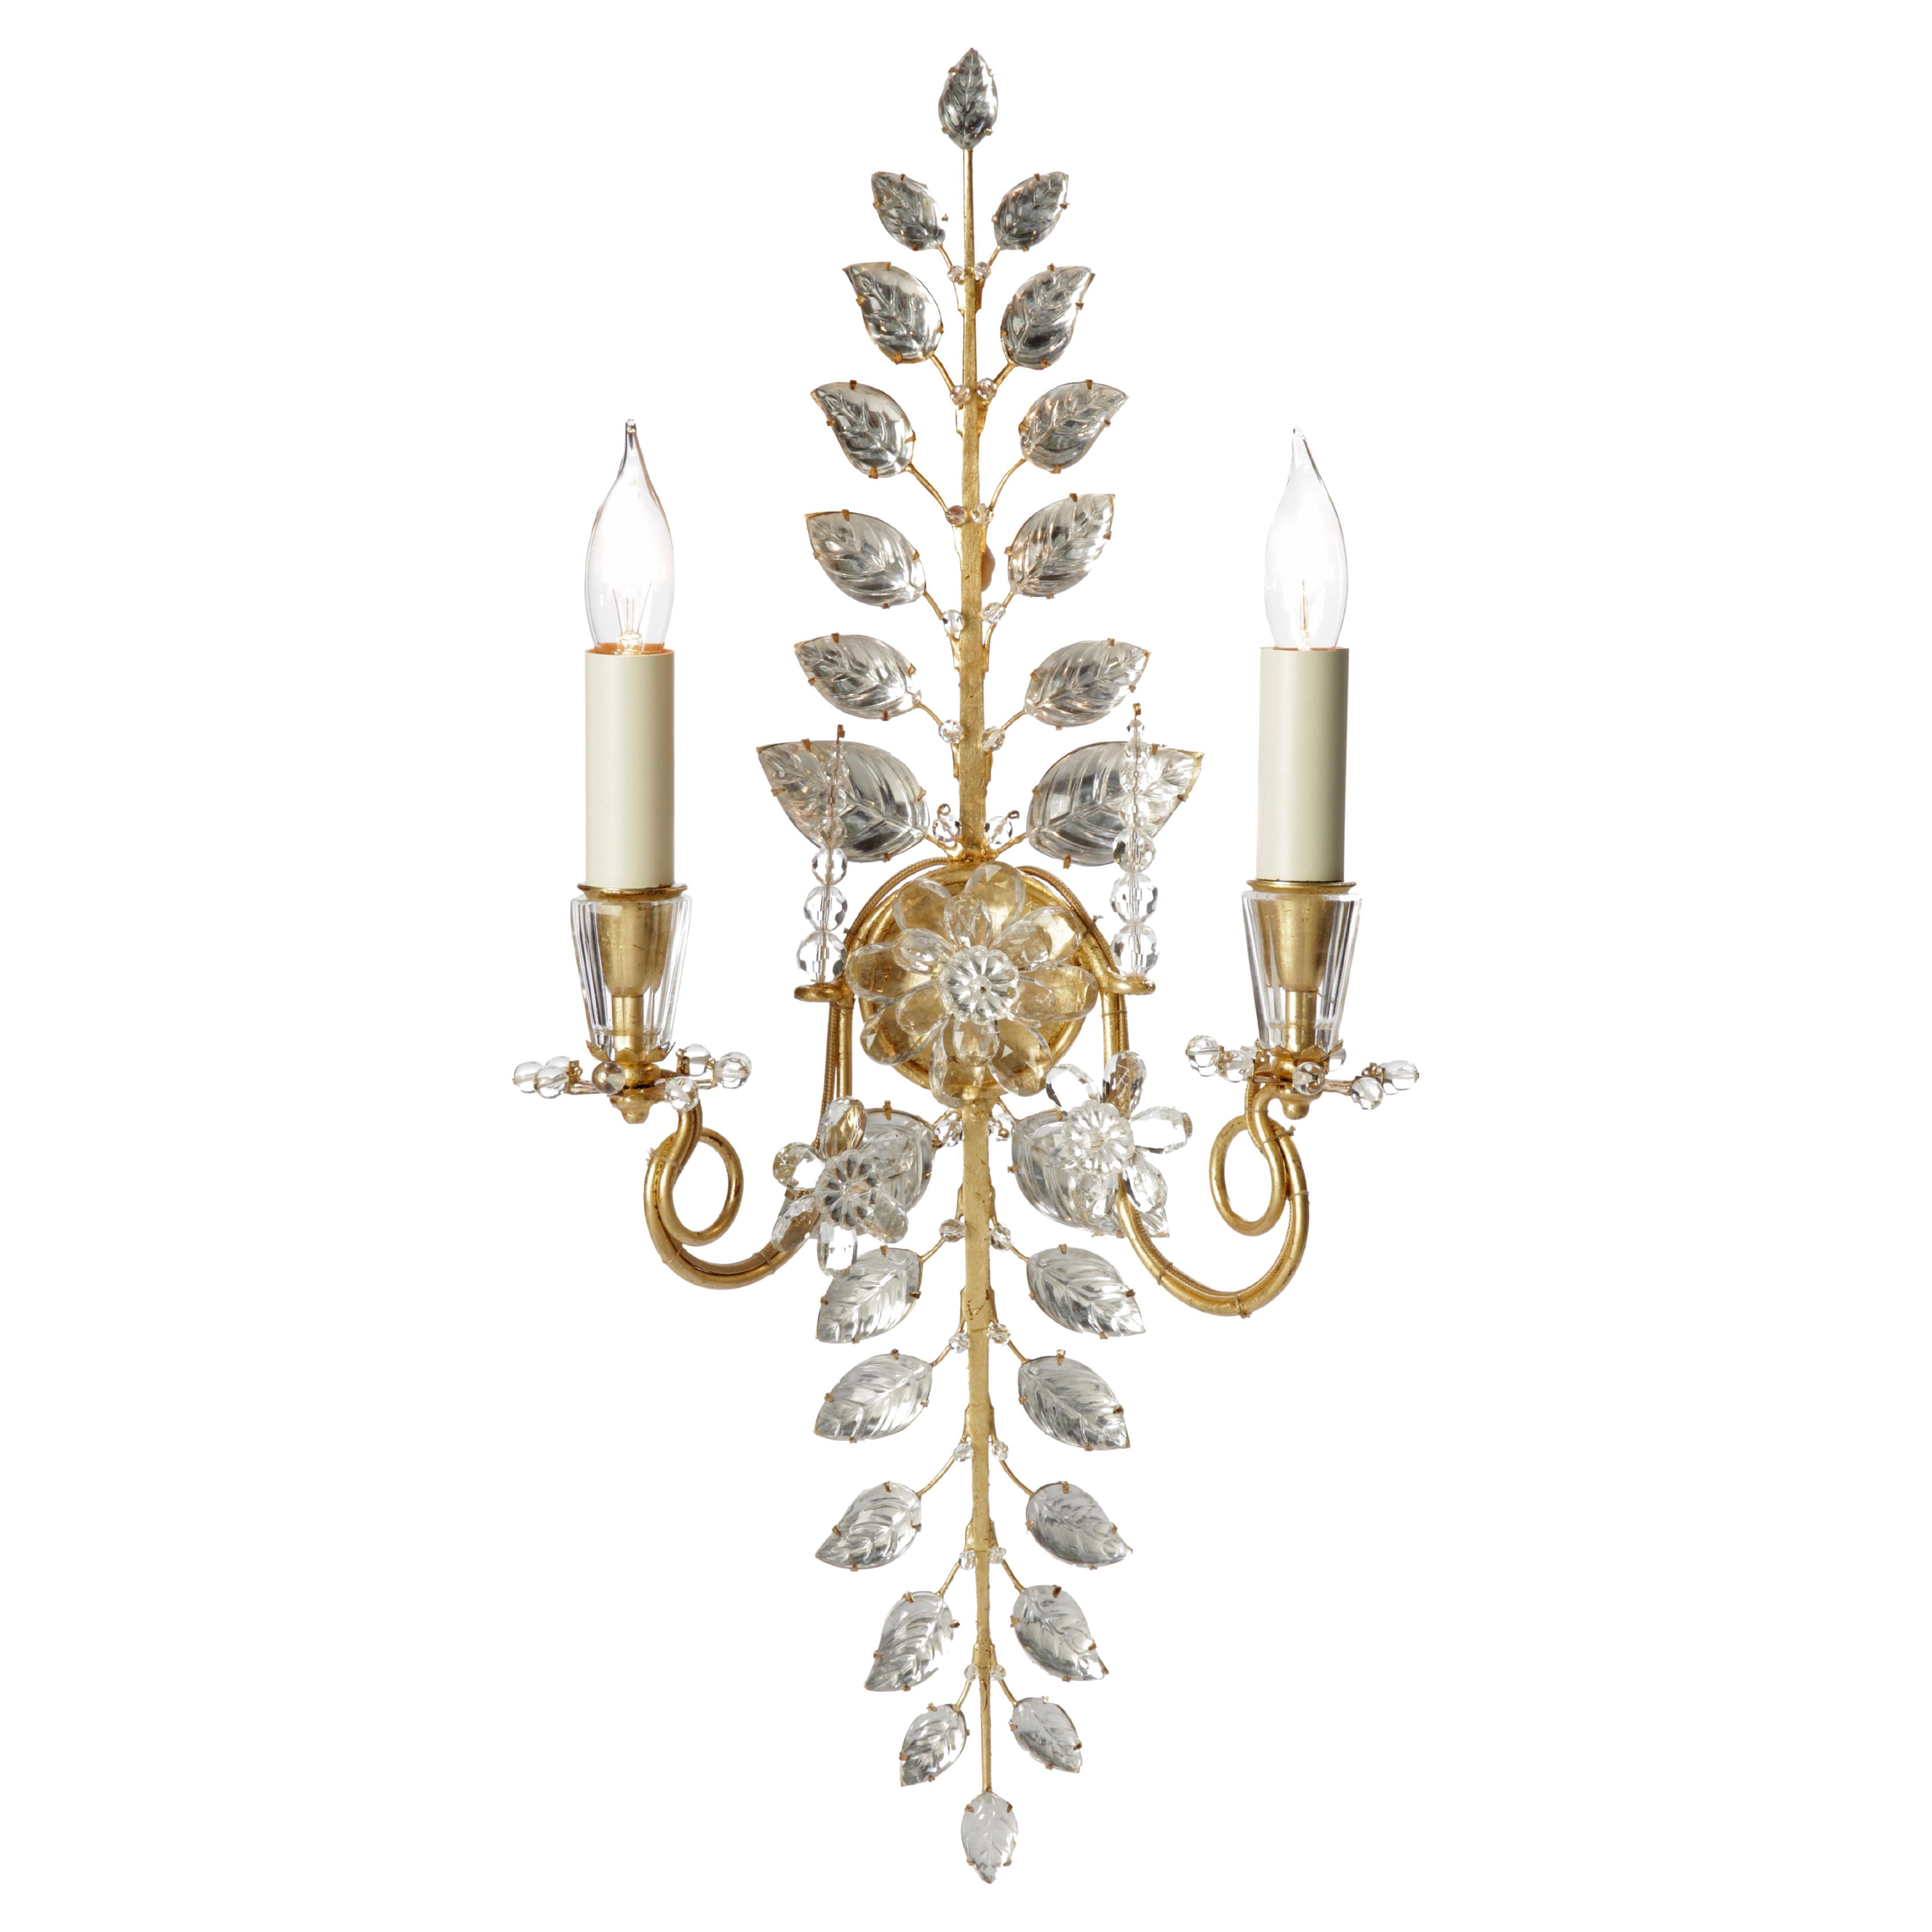 #11170-02 Maison Baguès wall sconce 2 lights
Gold or silver gilding
Fine ironwork and crystal

Can be UL listed for an extra fee.
Shades are available. Contact us for options and pricing.
Can be sold single (1) sconce or as a pair (2). 

PLEASE NOTE